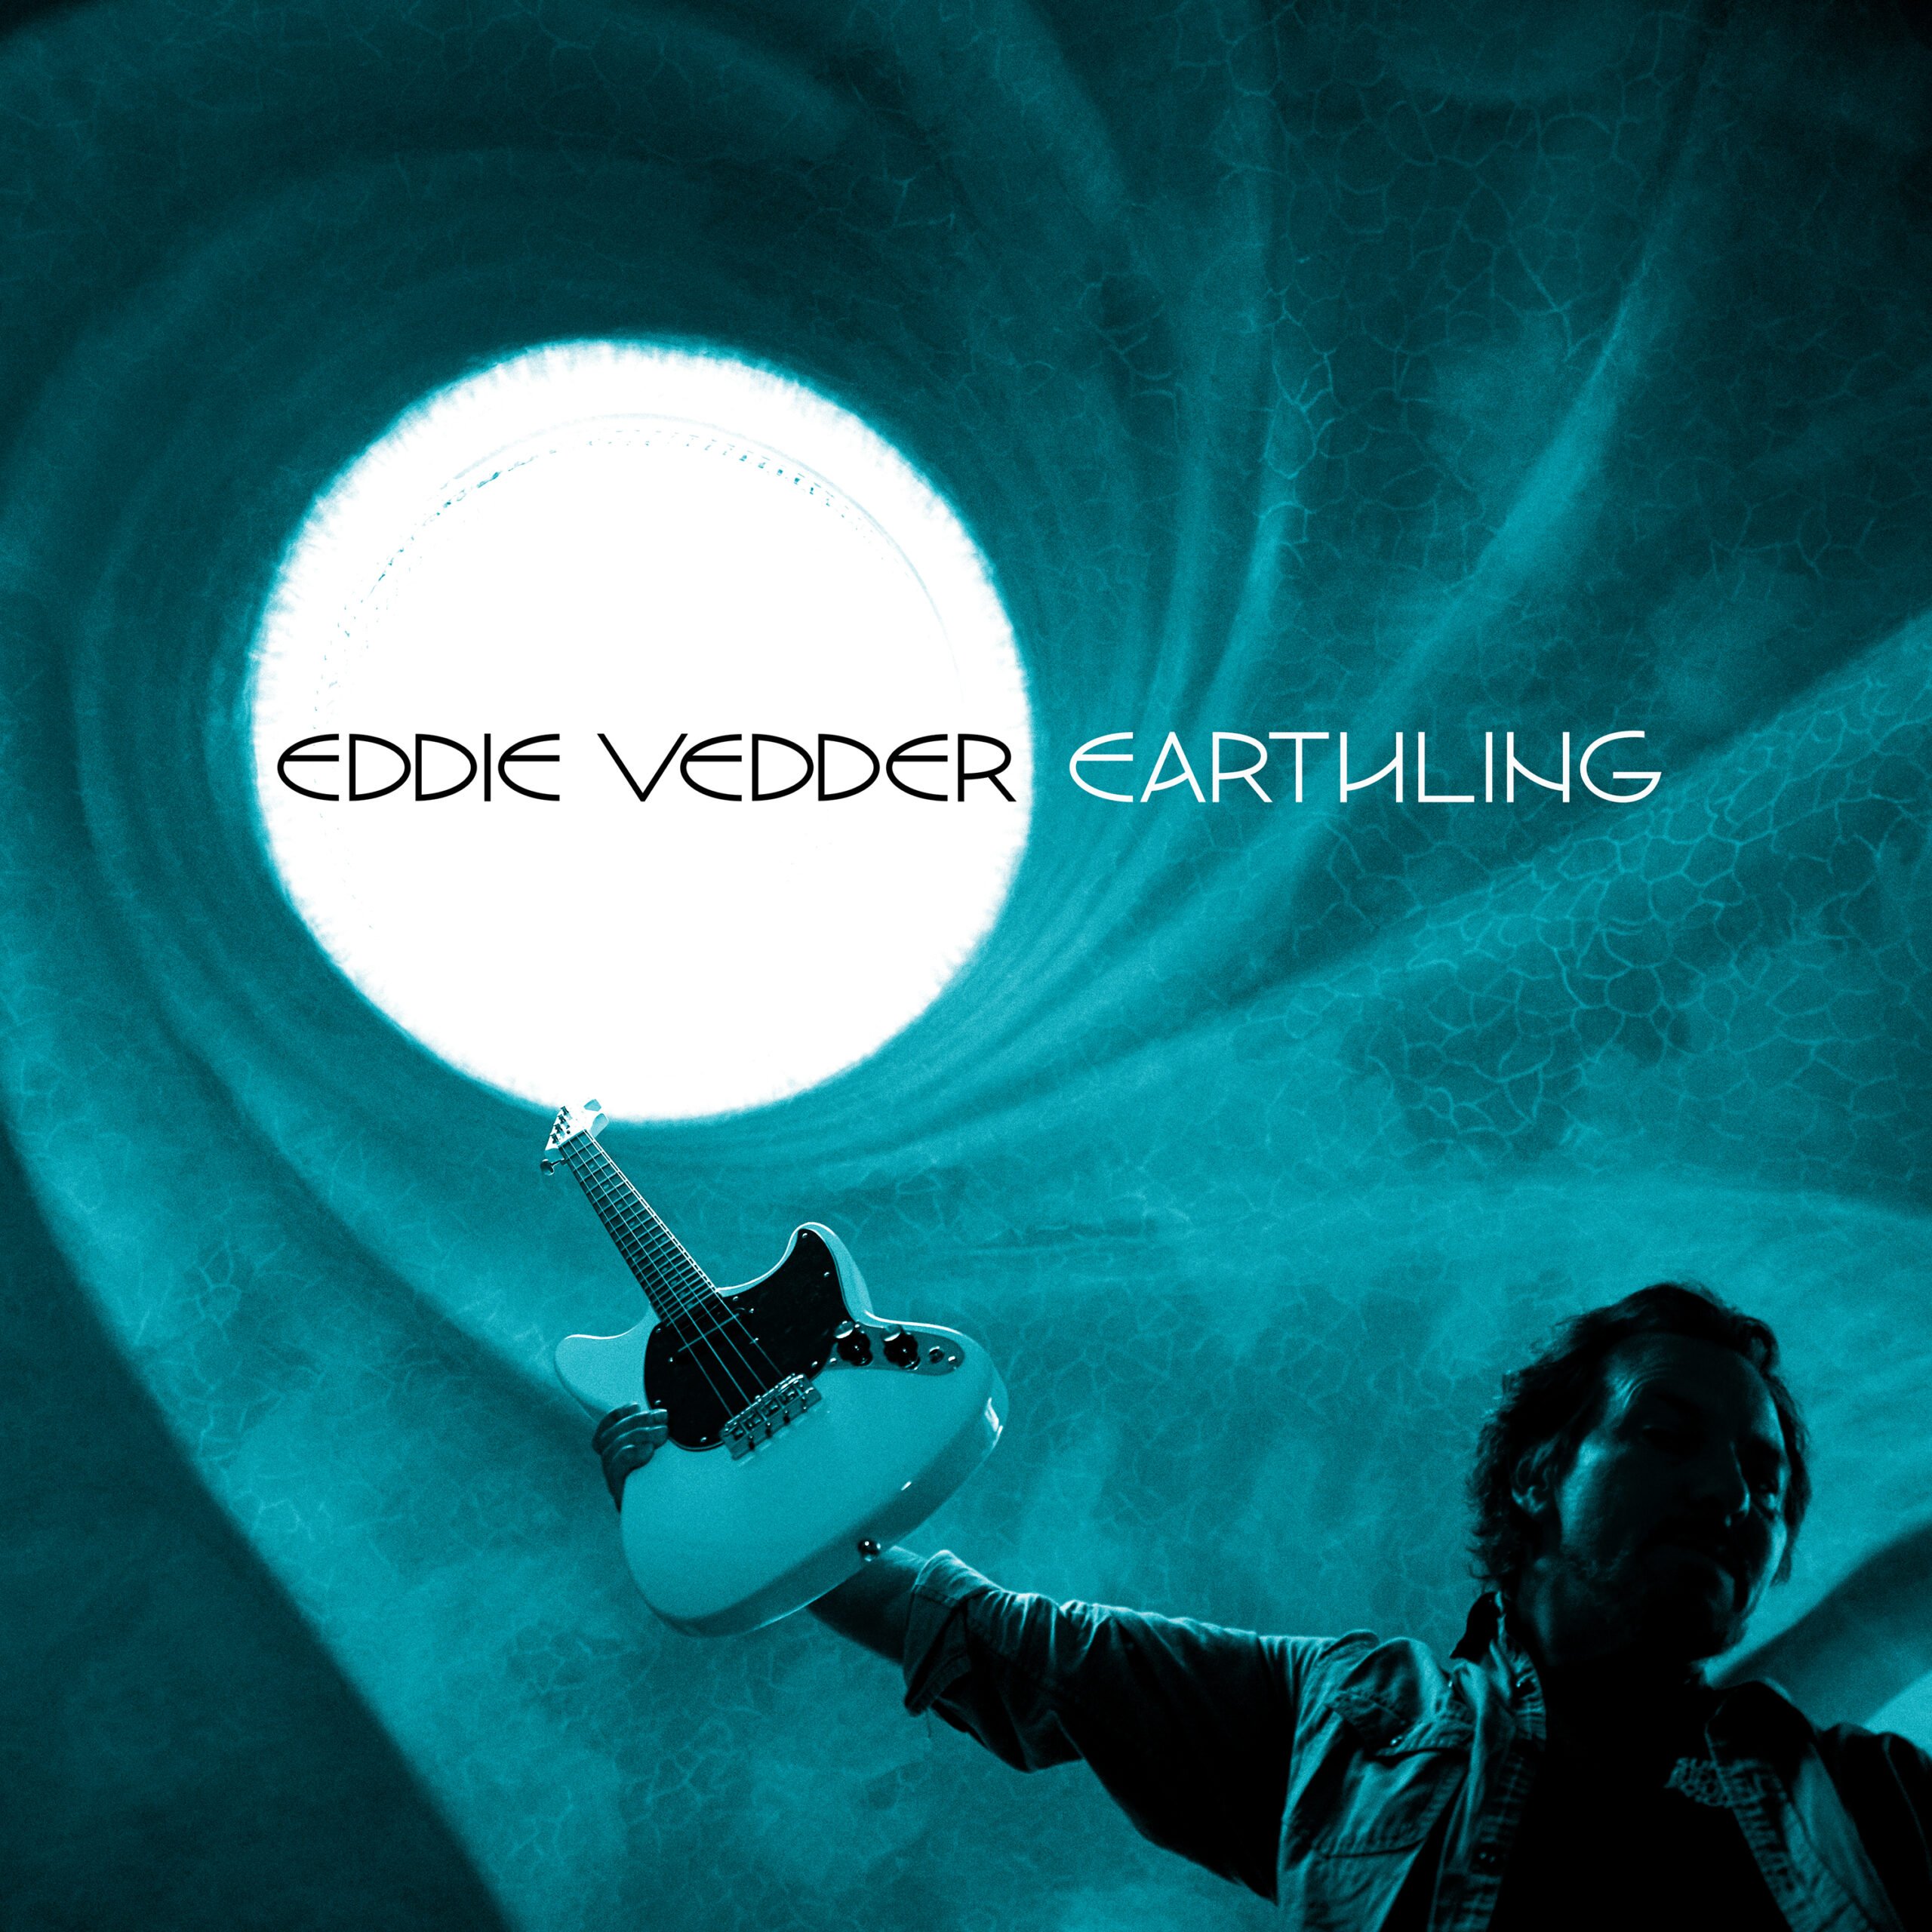 eddie vedder earthling cover art by Universal Music Group for use by 360 Magazine